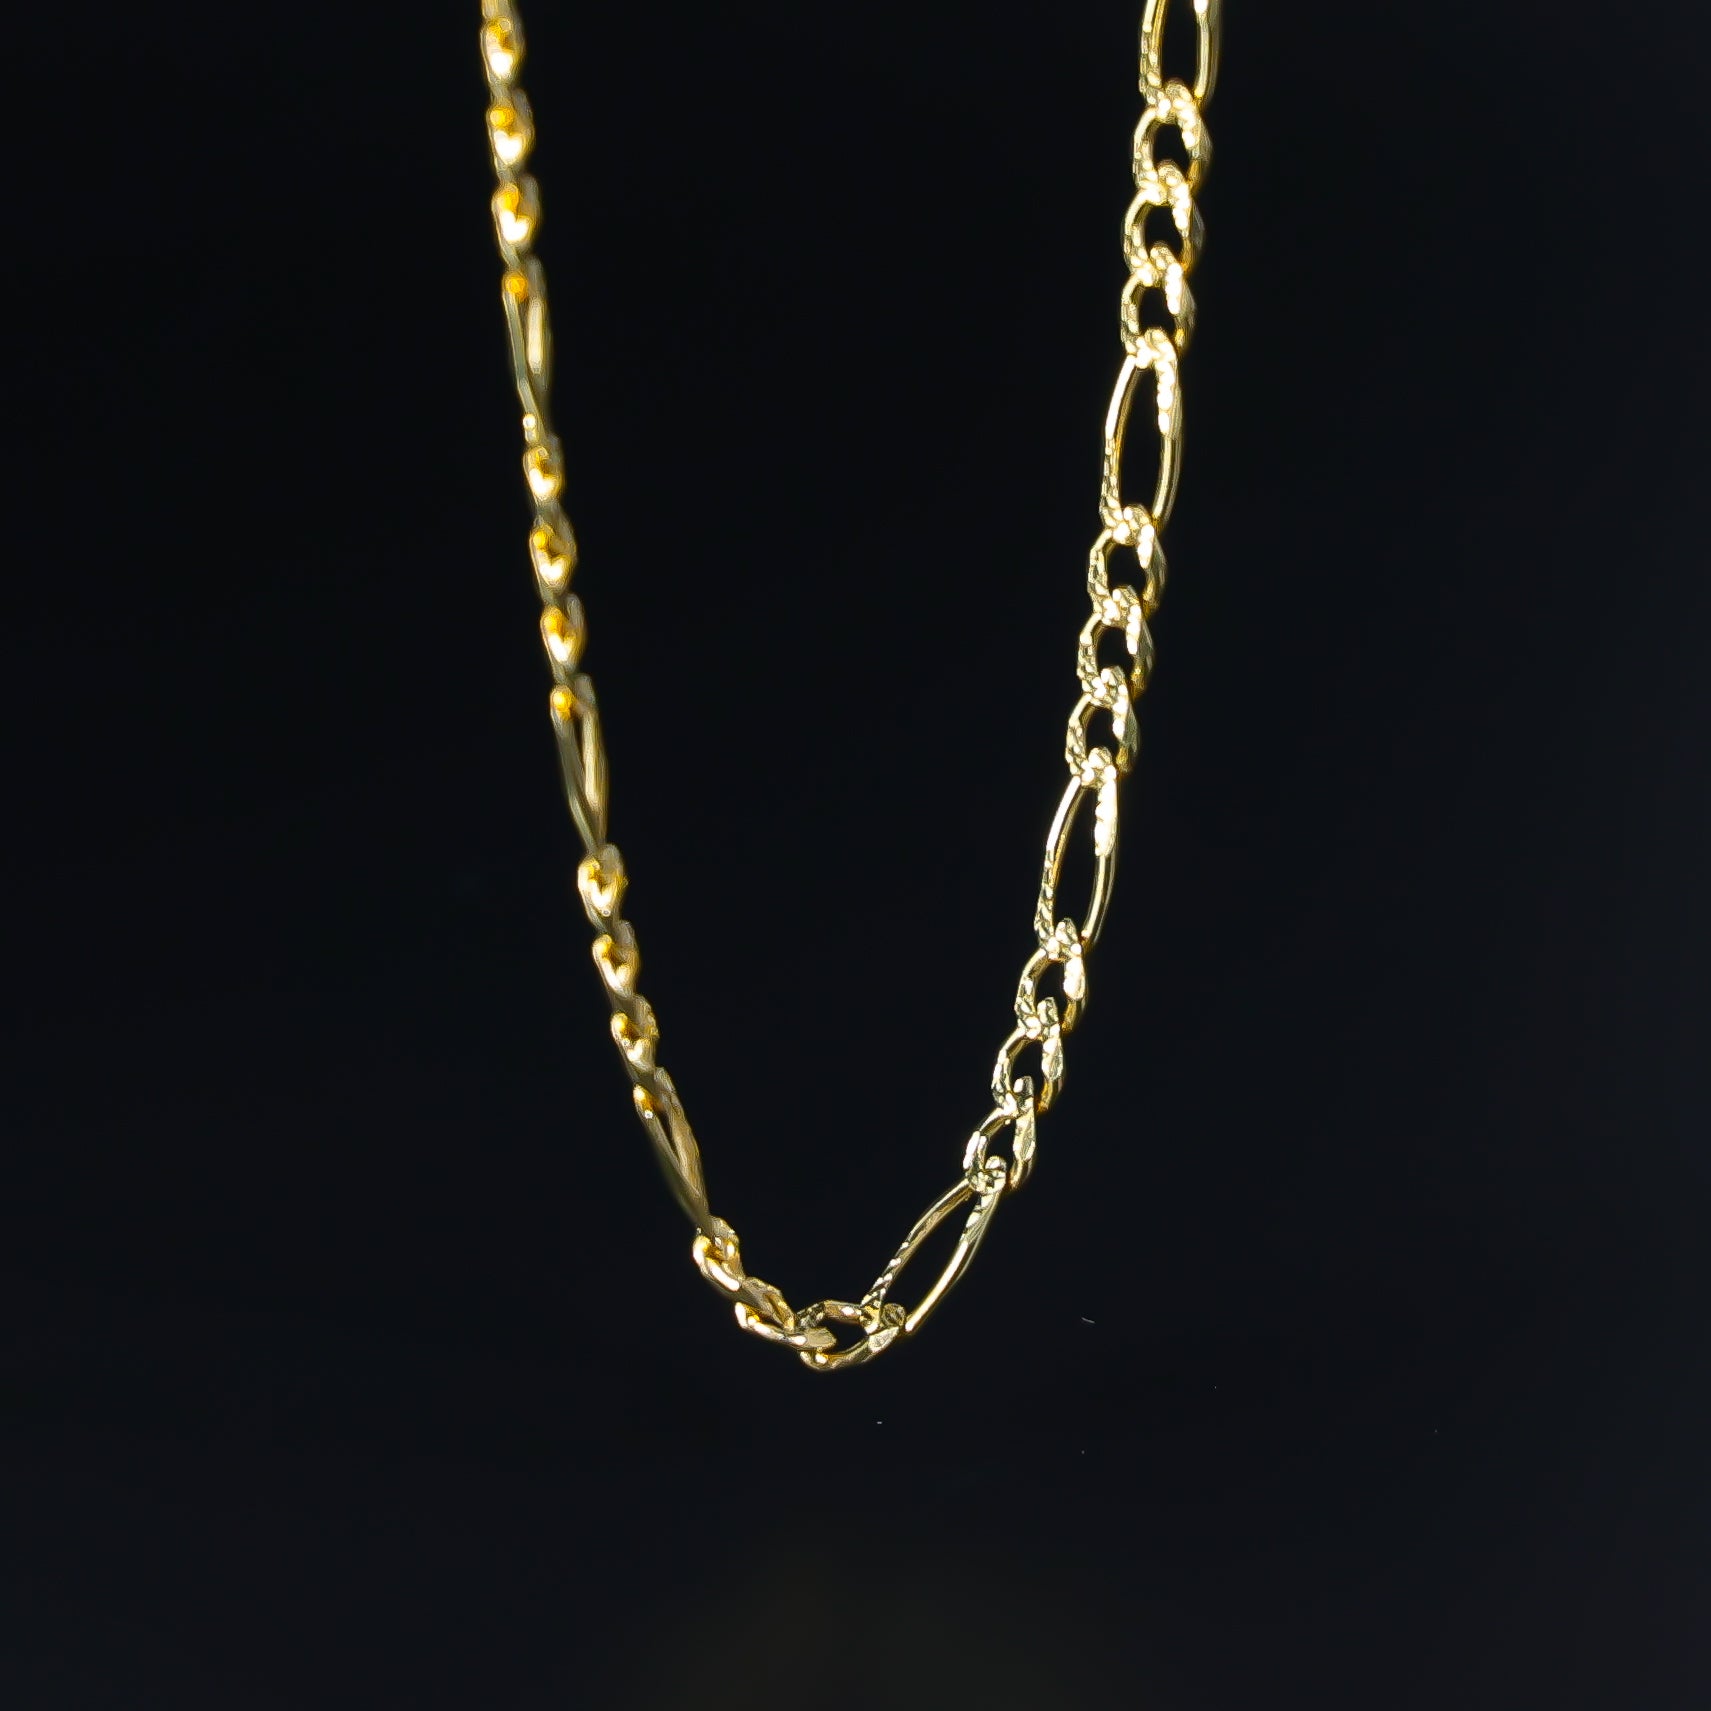 Gold 4mm Solid Figaro Chain Model-0353 - Charlie & Co. Jewelry